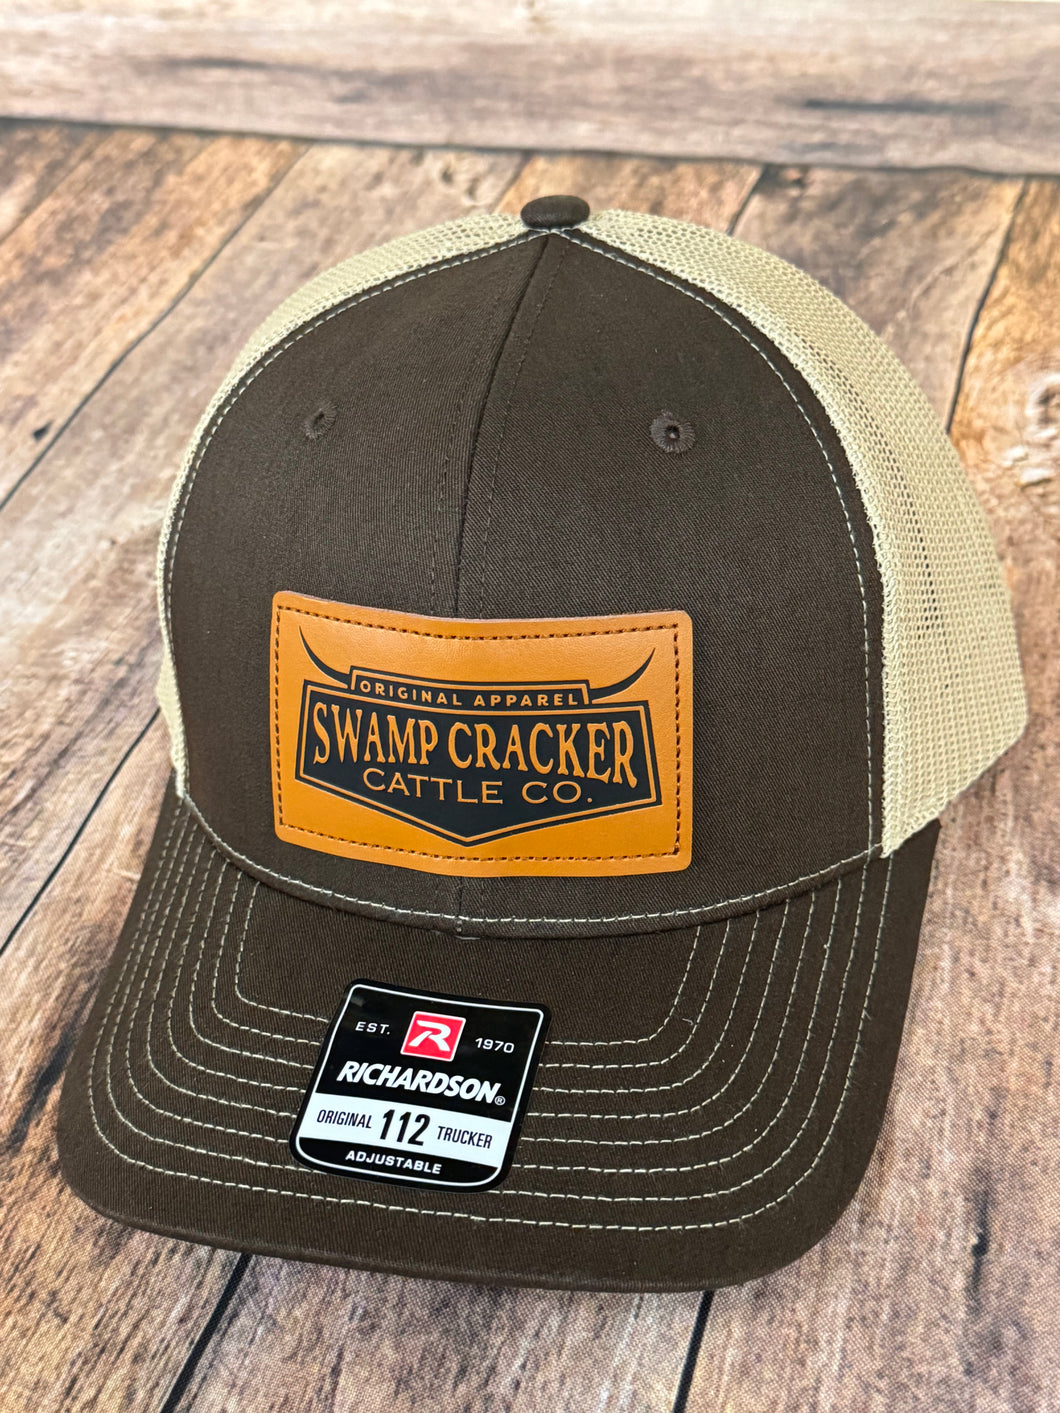 Embossed Leather Swamp Cracker Cattle Co hat